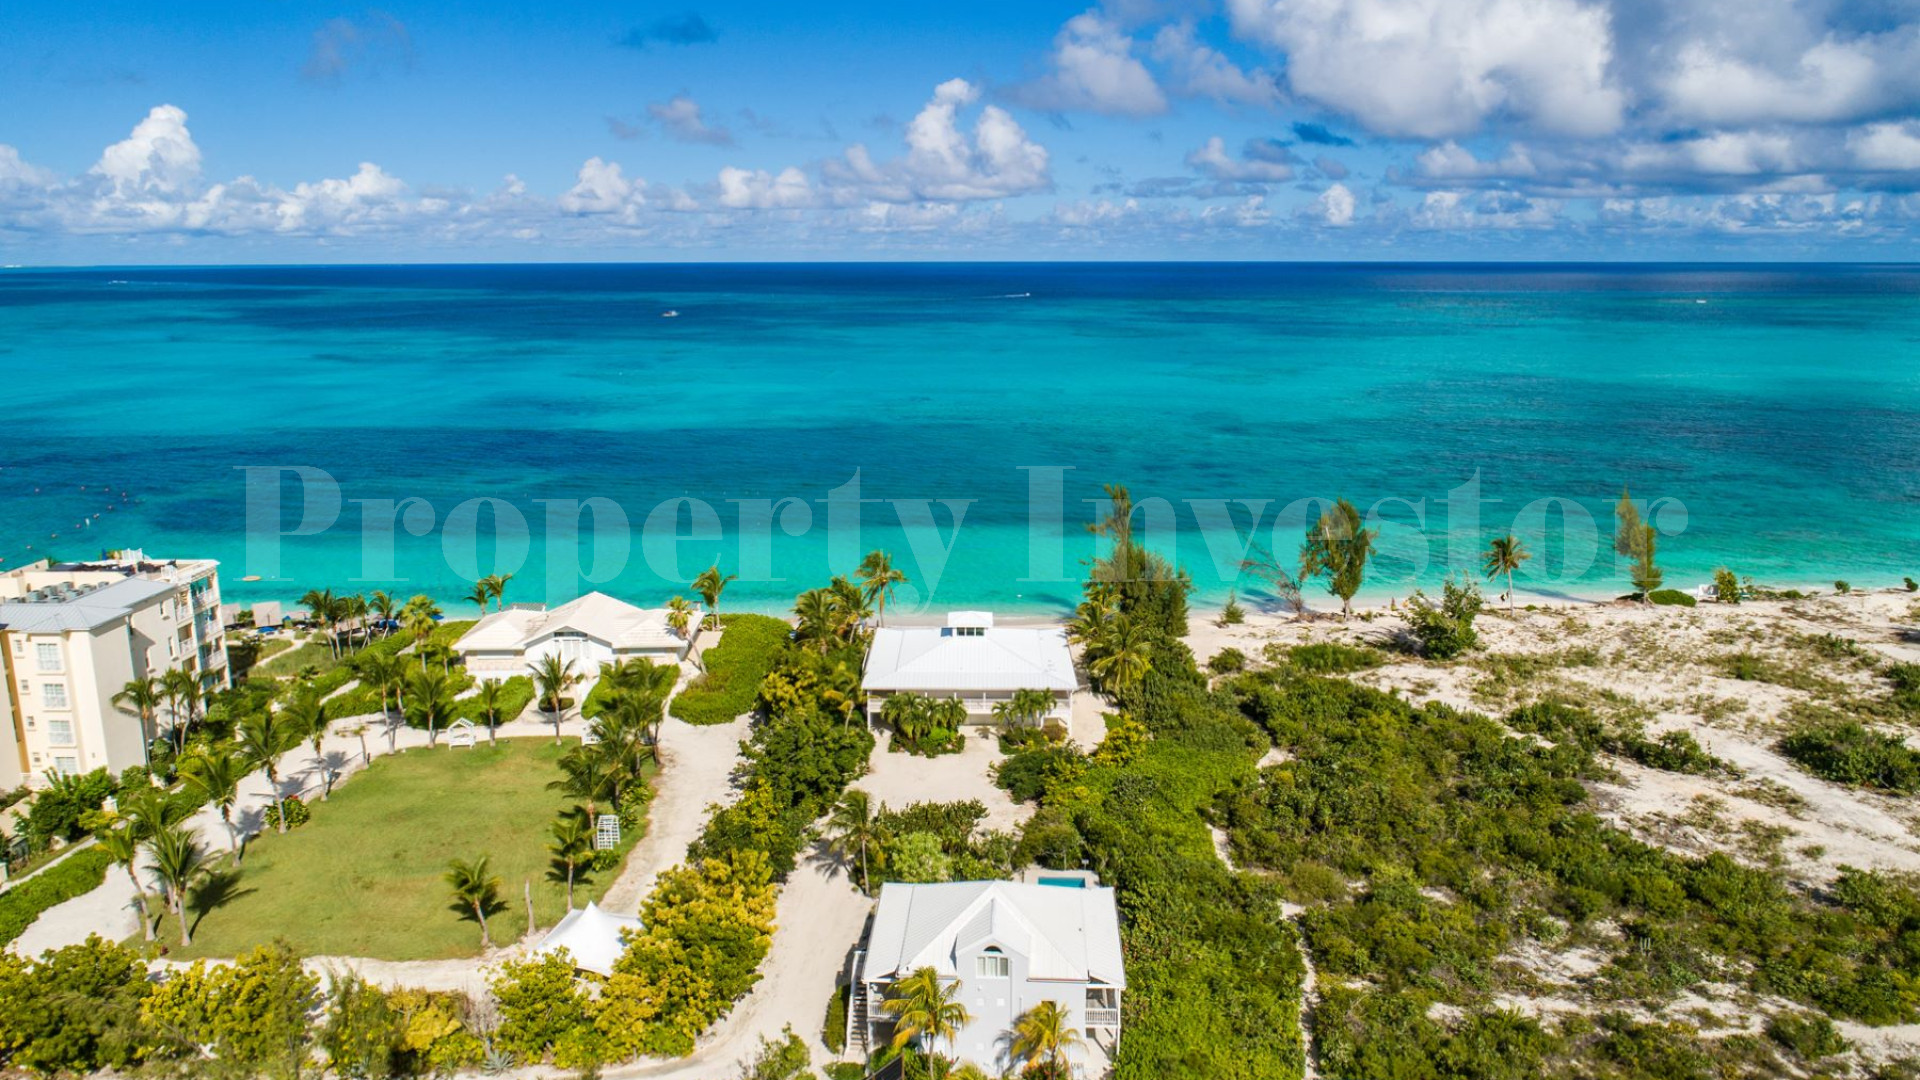 Beautiful 6 Bedroom Caribbean Style Luxury Beachfront Villa with Private Beach Access for Sale in Grace Bay, Turks & Caicos